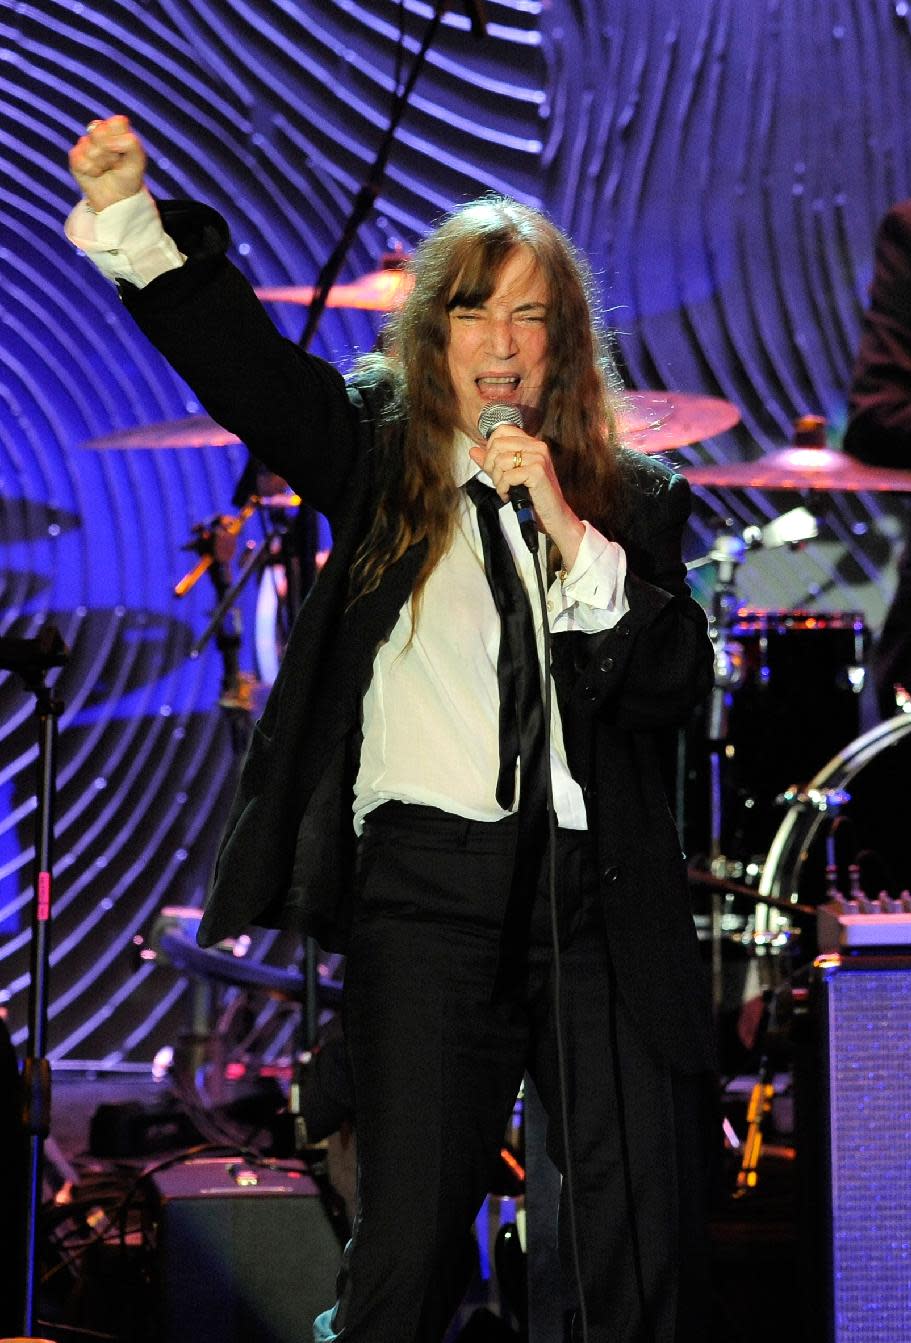 Recording artist Patti Smith performs at the Clive Davis Pre-GRAMMY Gala on Saturday, Feb. 9, 2013 in Beverly Hills, Calif. (Photo by Chris Pizzello/Invision/AP)